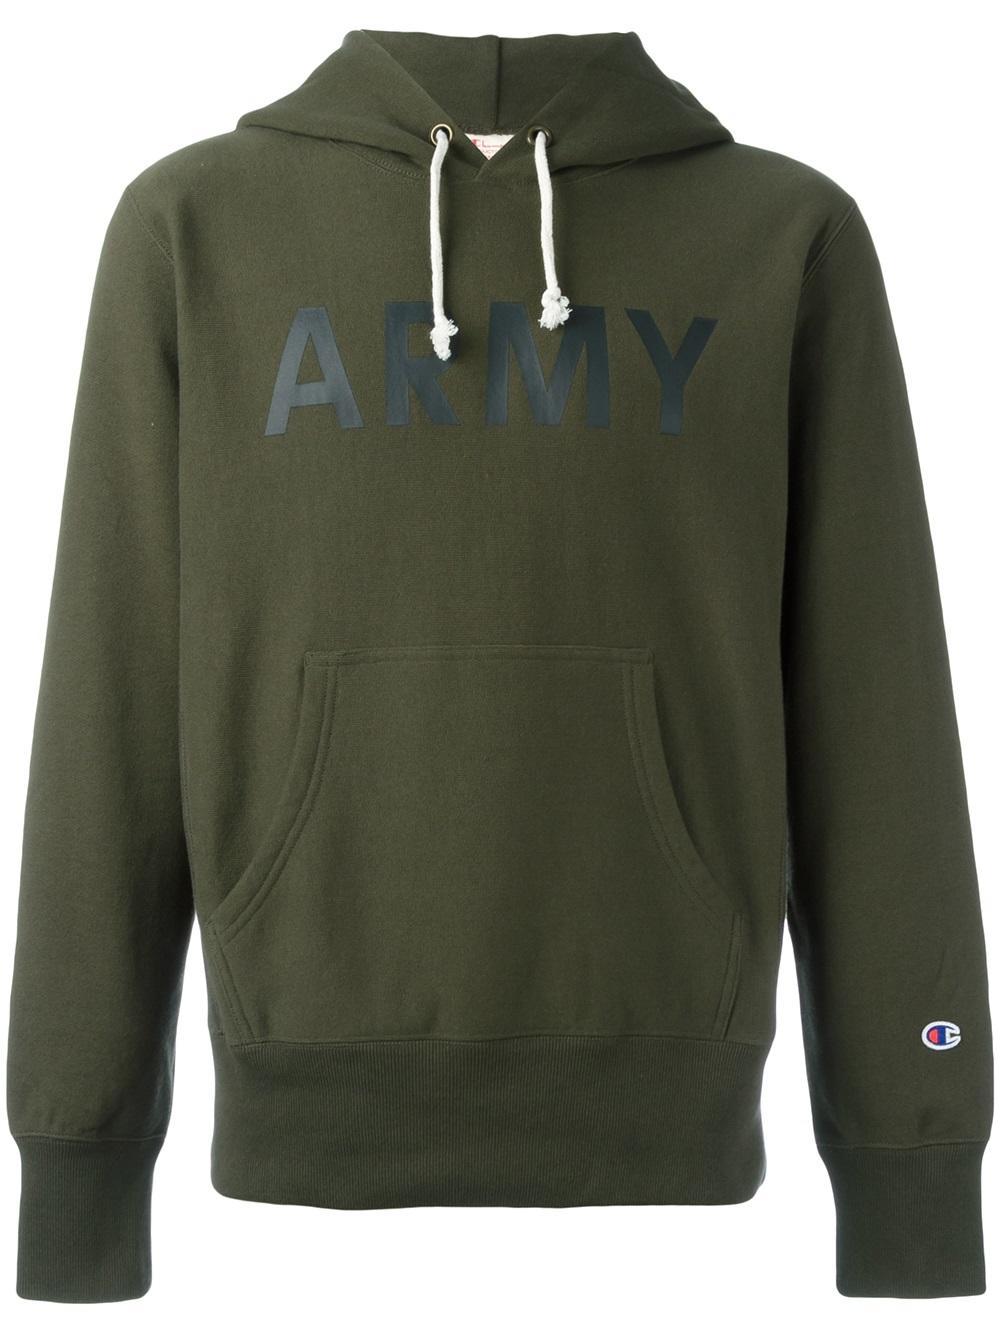 Champion Cotton Army Hoodie in Green for Men - Lyst